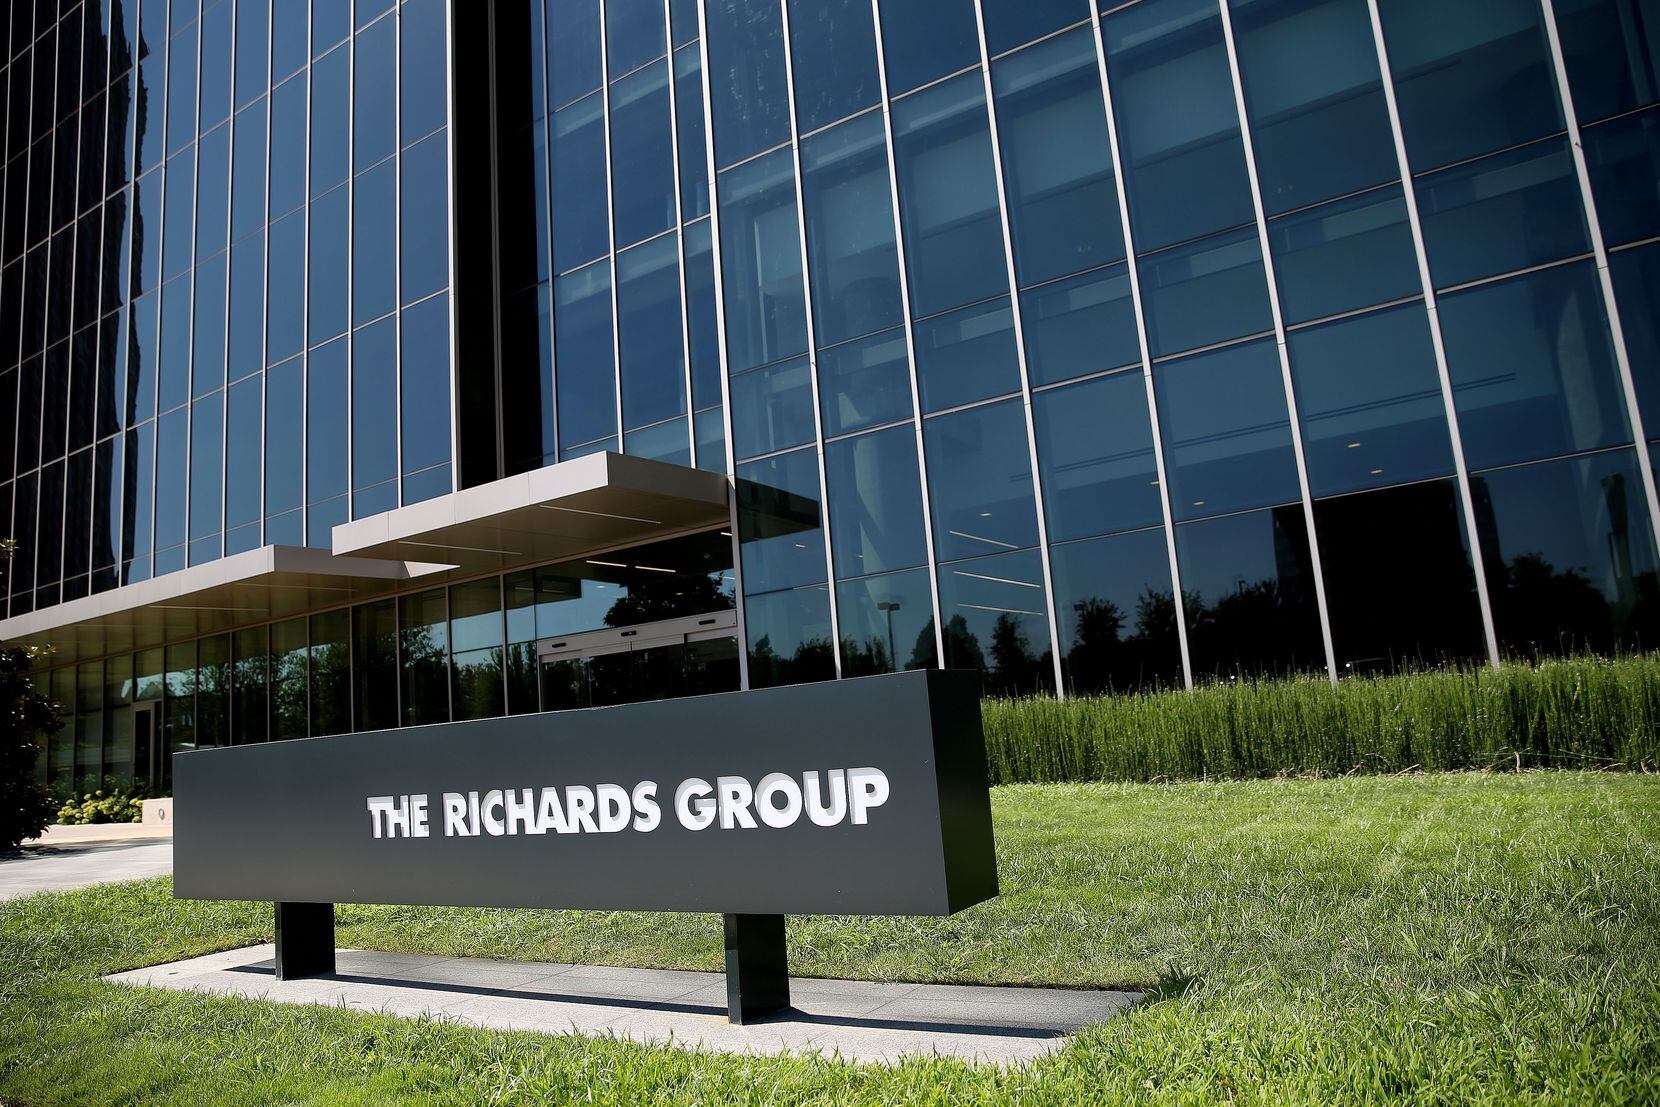 The Richards Group tower is in the Cityplace development at North Central Expressway and...